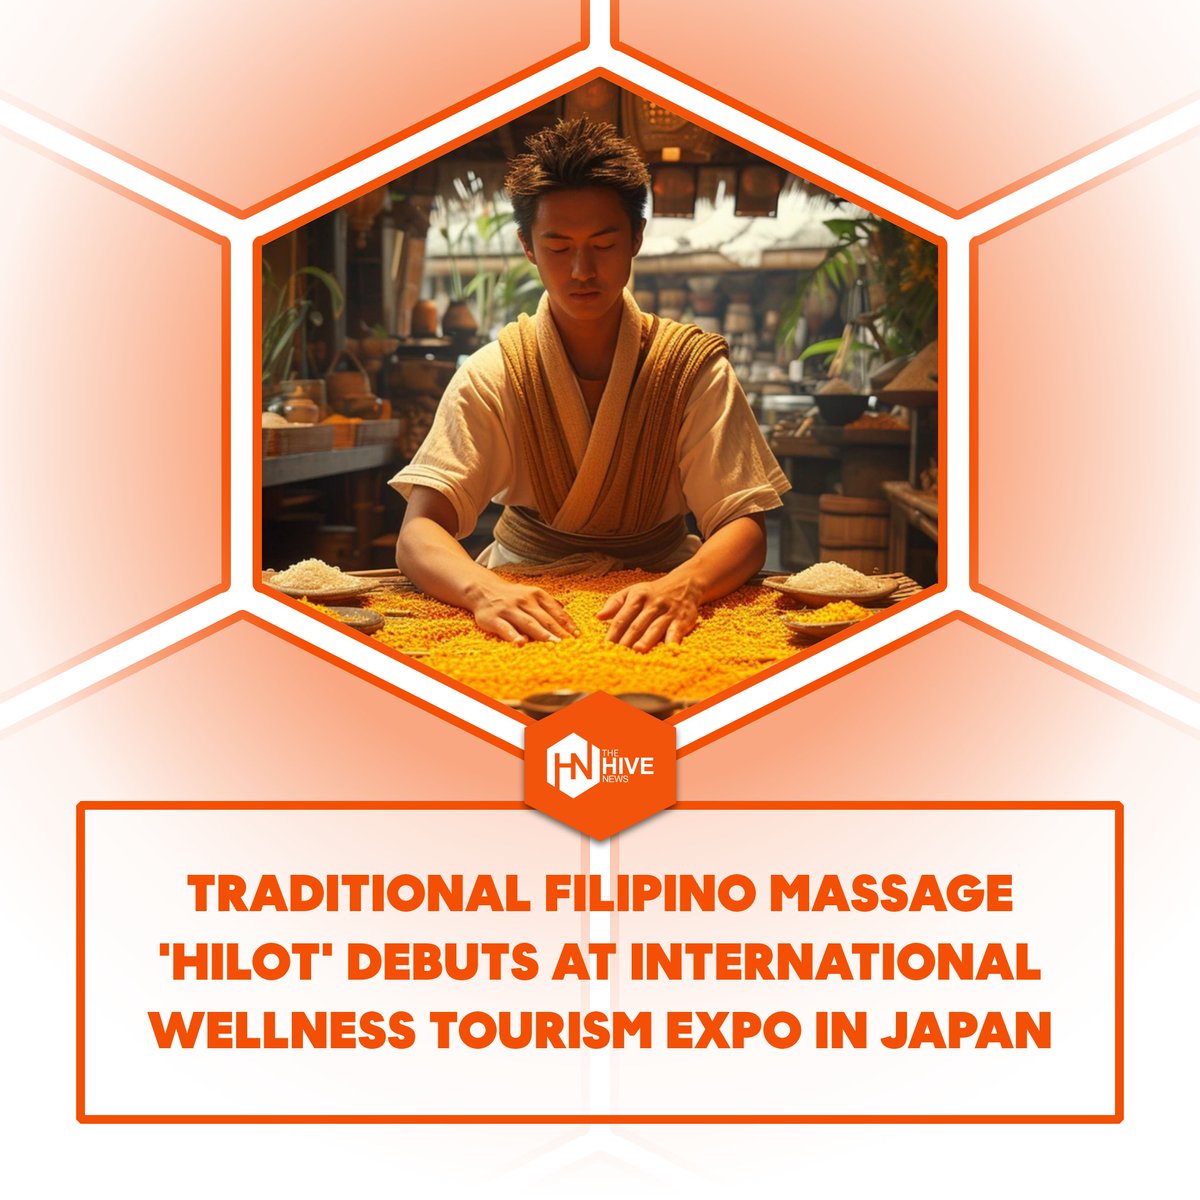 Embrace the healing touch of Filipino tradition! 'Hilot', our traditional massage, takes center stage at the International Wellness Tourism Expo in Japan. 🌿✨ #Hilot #FilipinoMassage #WellnessExpo
Read it here: mnktech.iptime.org:7002/untitled-46-hi…